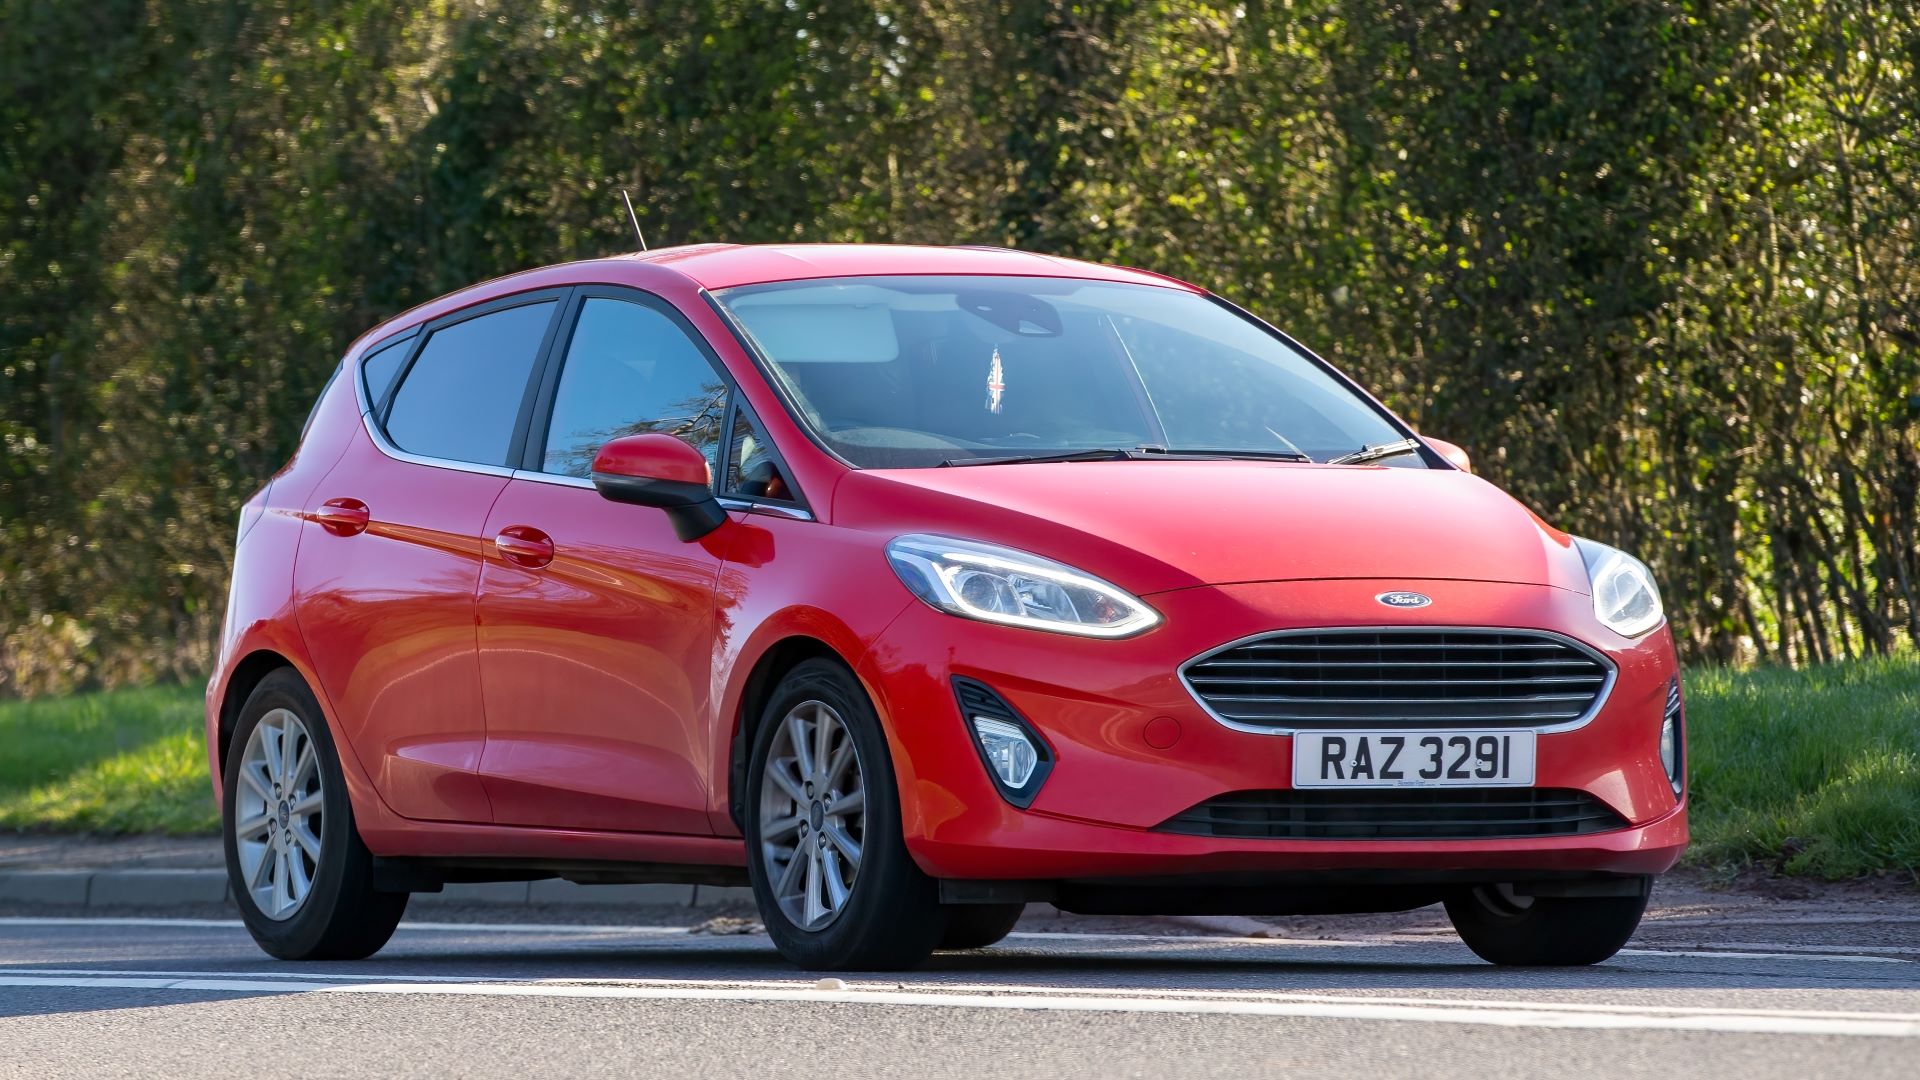 Roses are red, violets are blue, and Ford Fiestas are the most loved by you, reveals Warrantywise